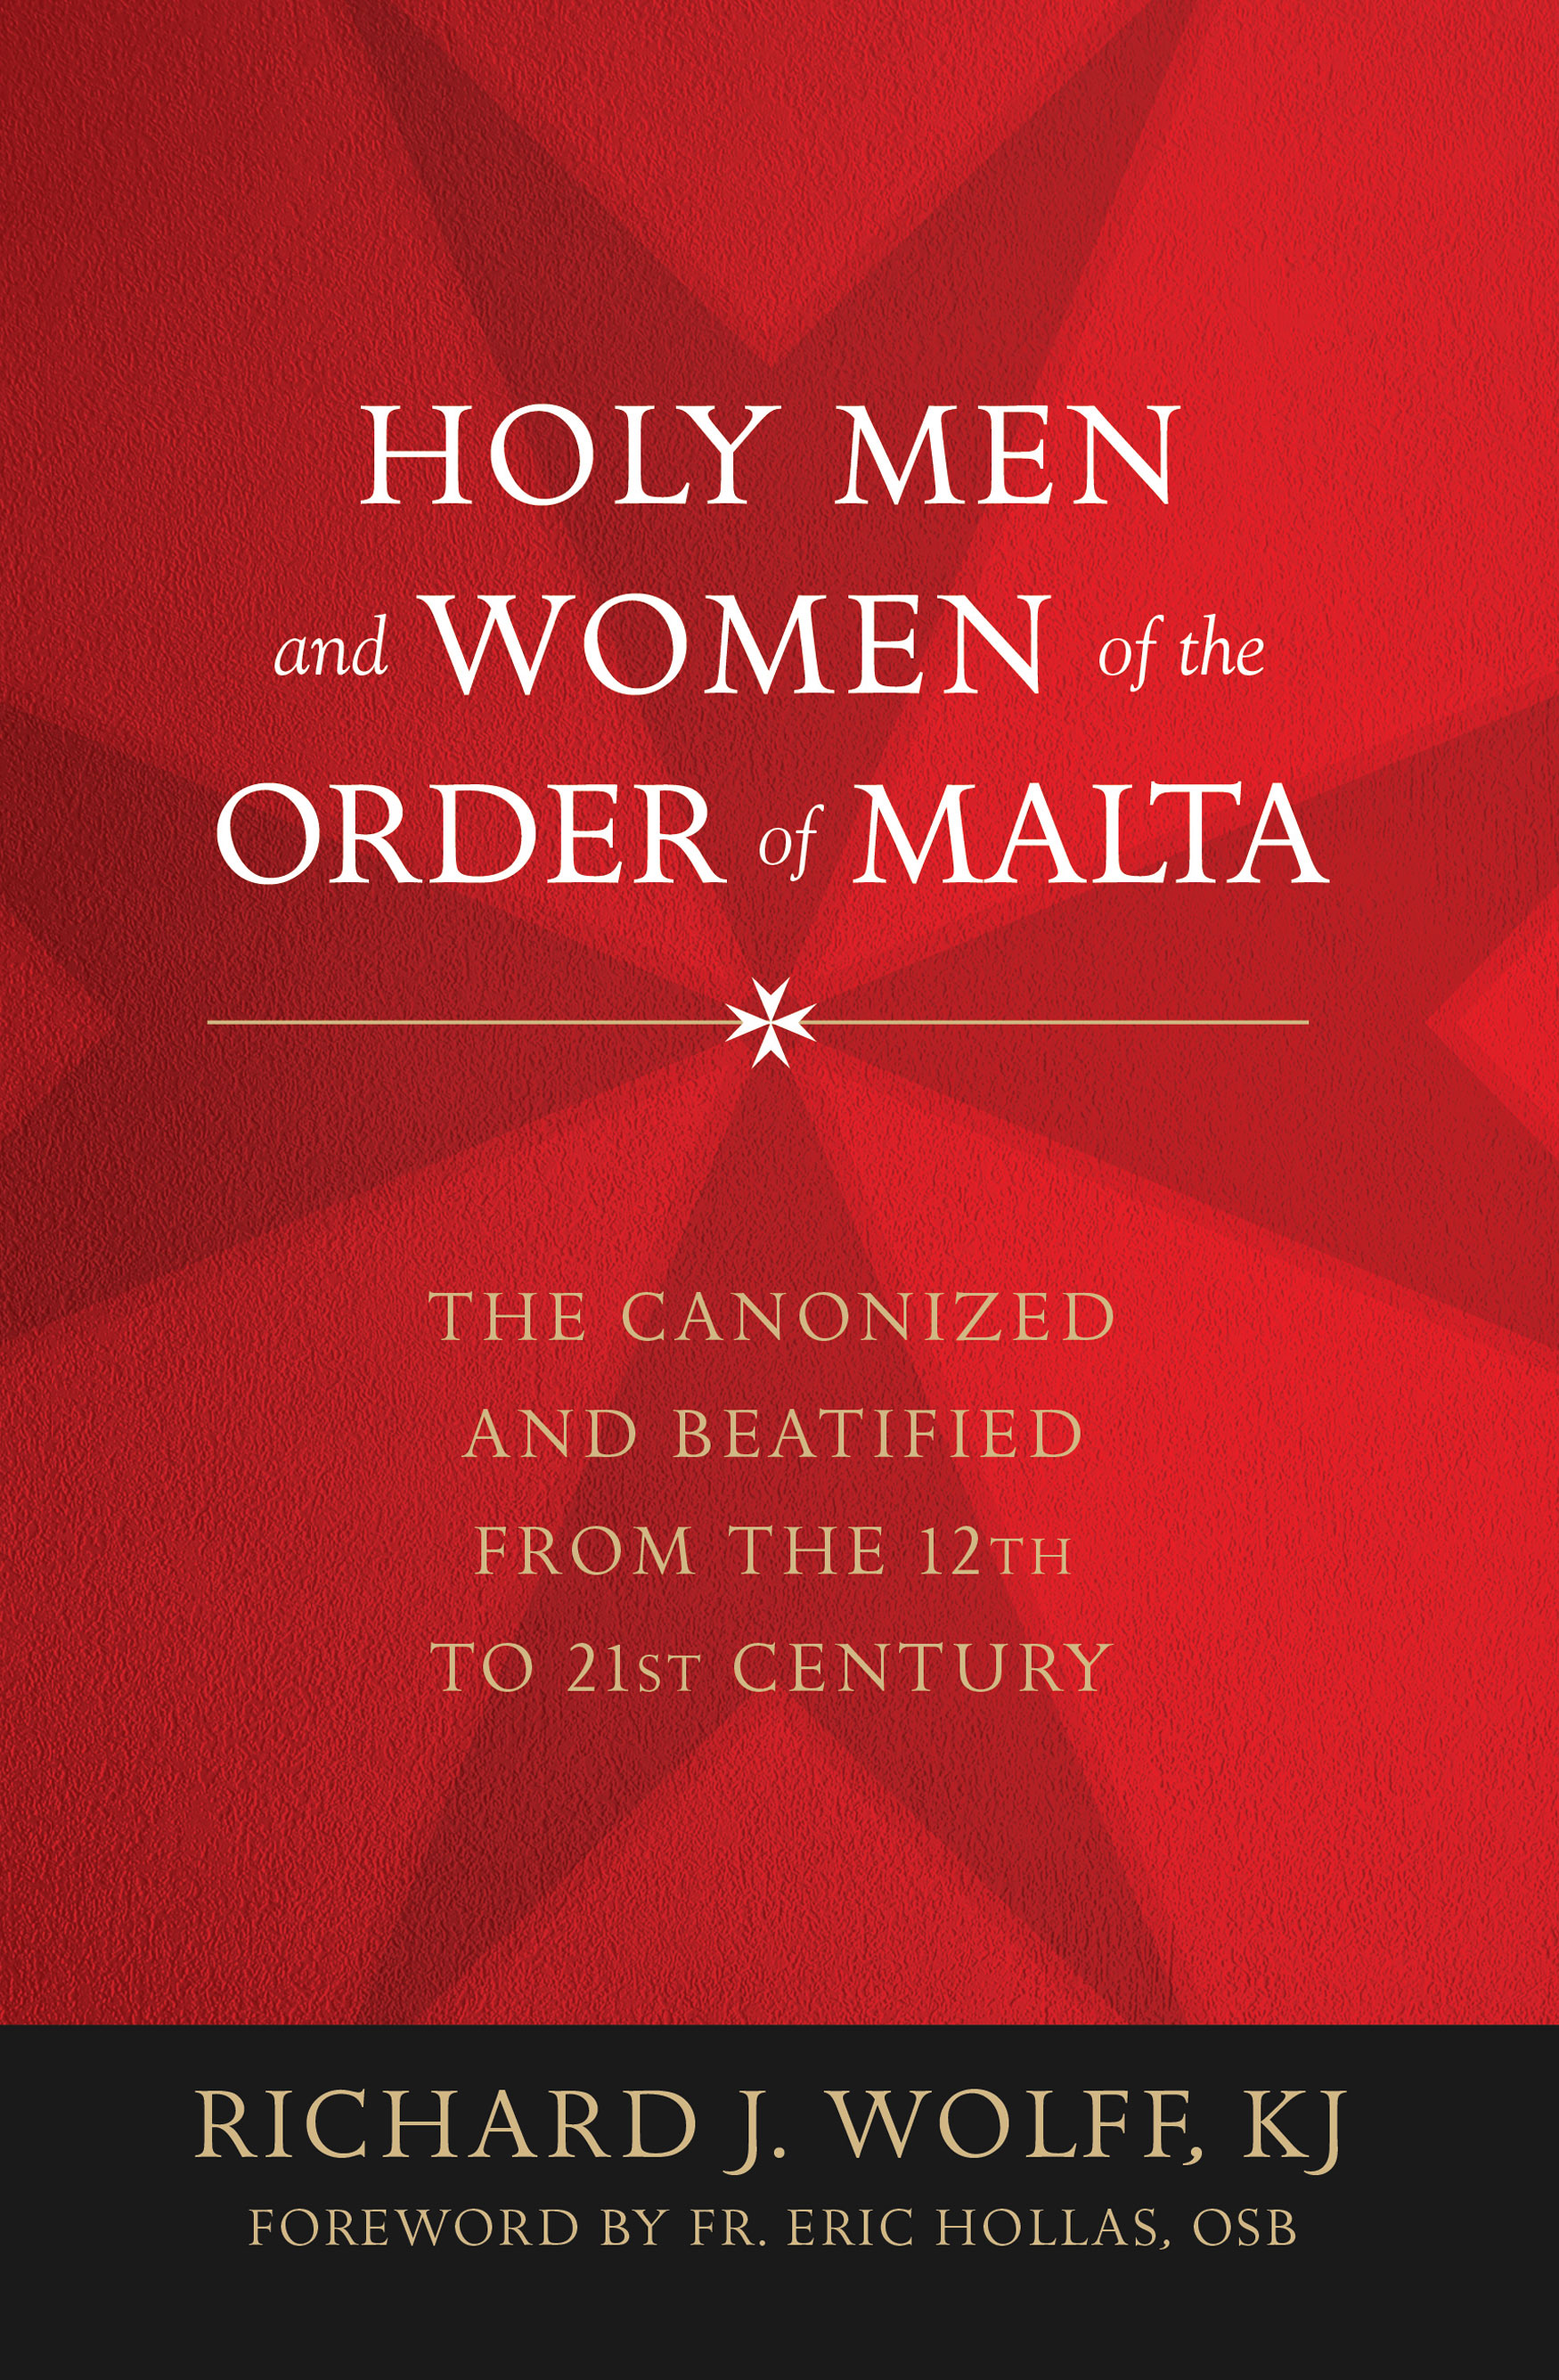 Holy Men and Women of the Order of Malta / Richard J Wolff